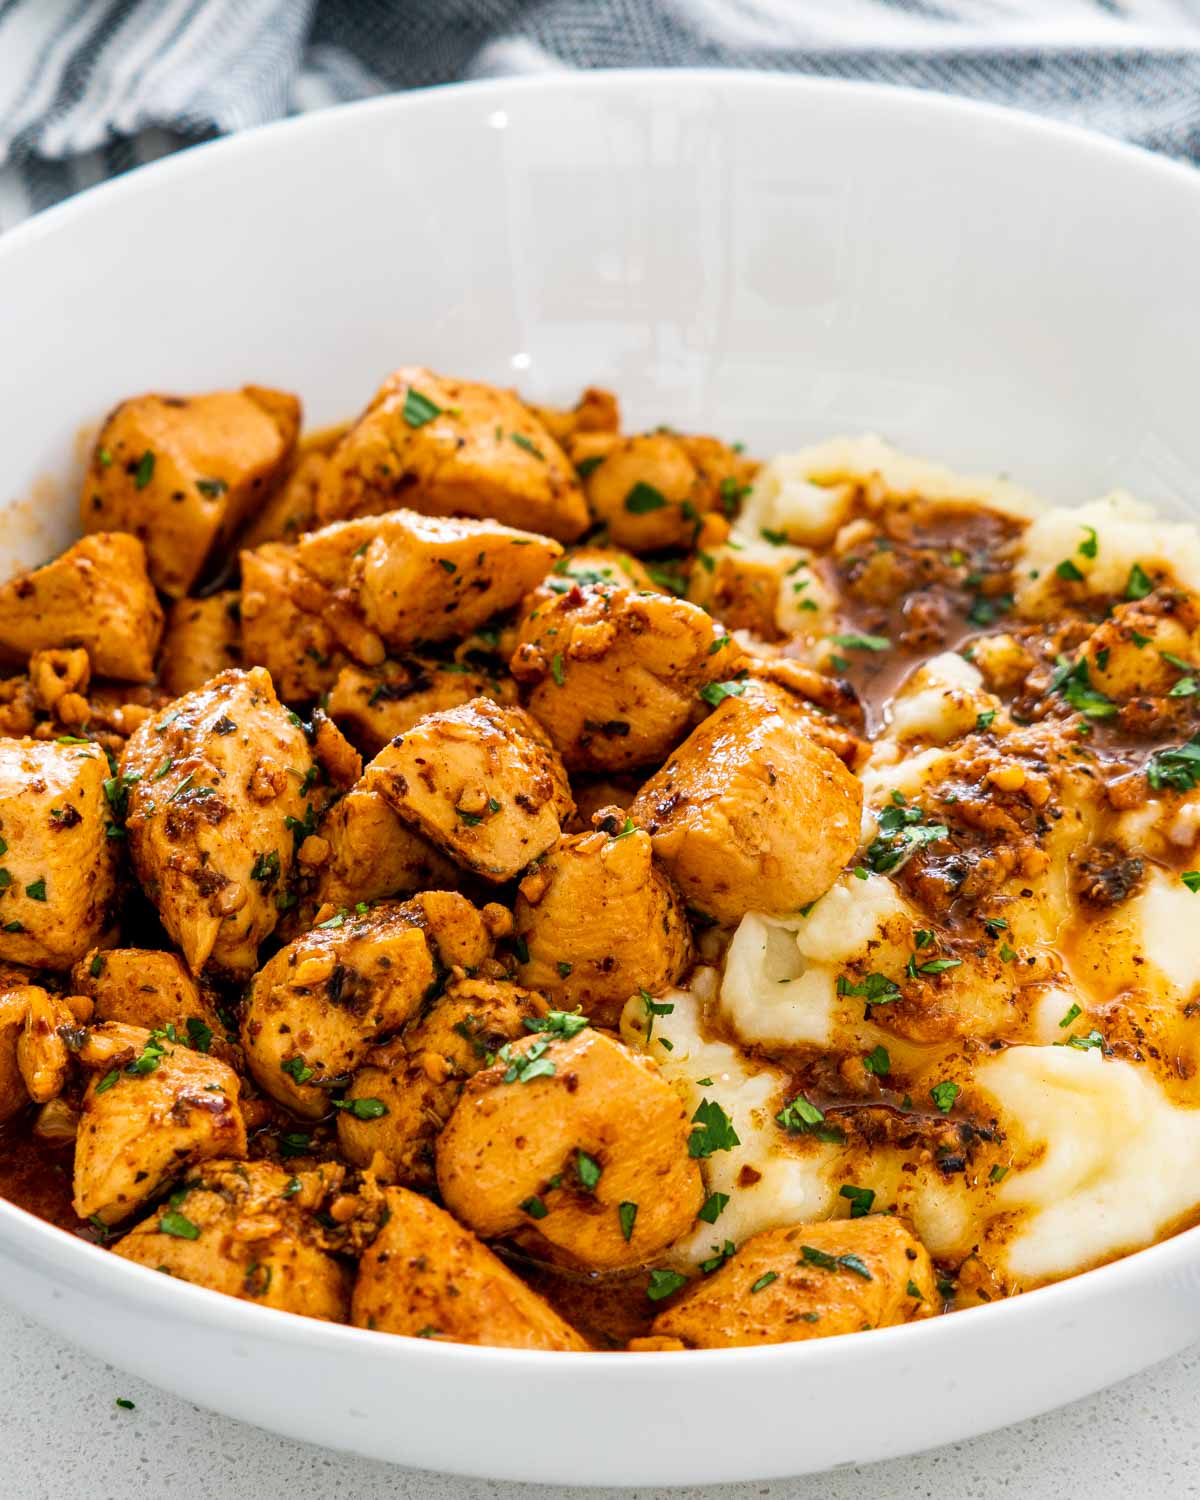 garlic butter chicken bites in a white plate with mashed potatoes.